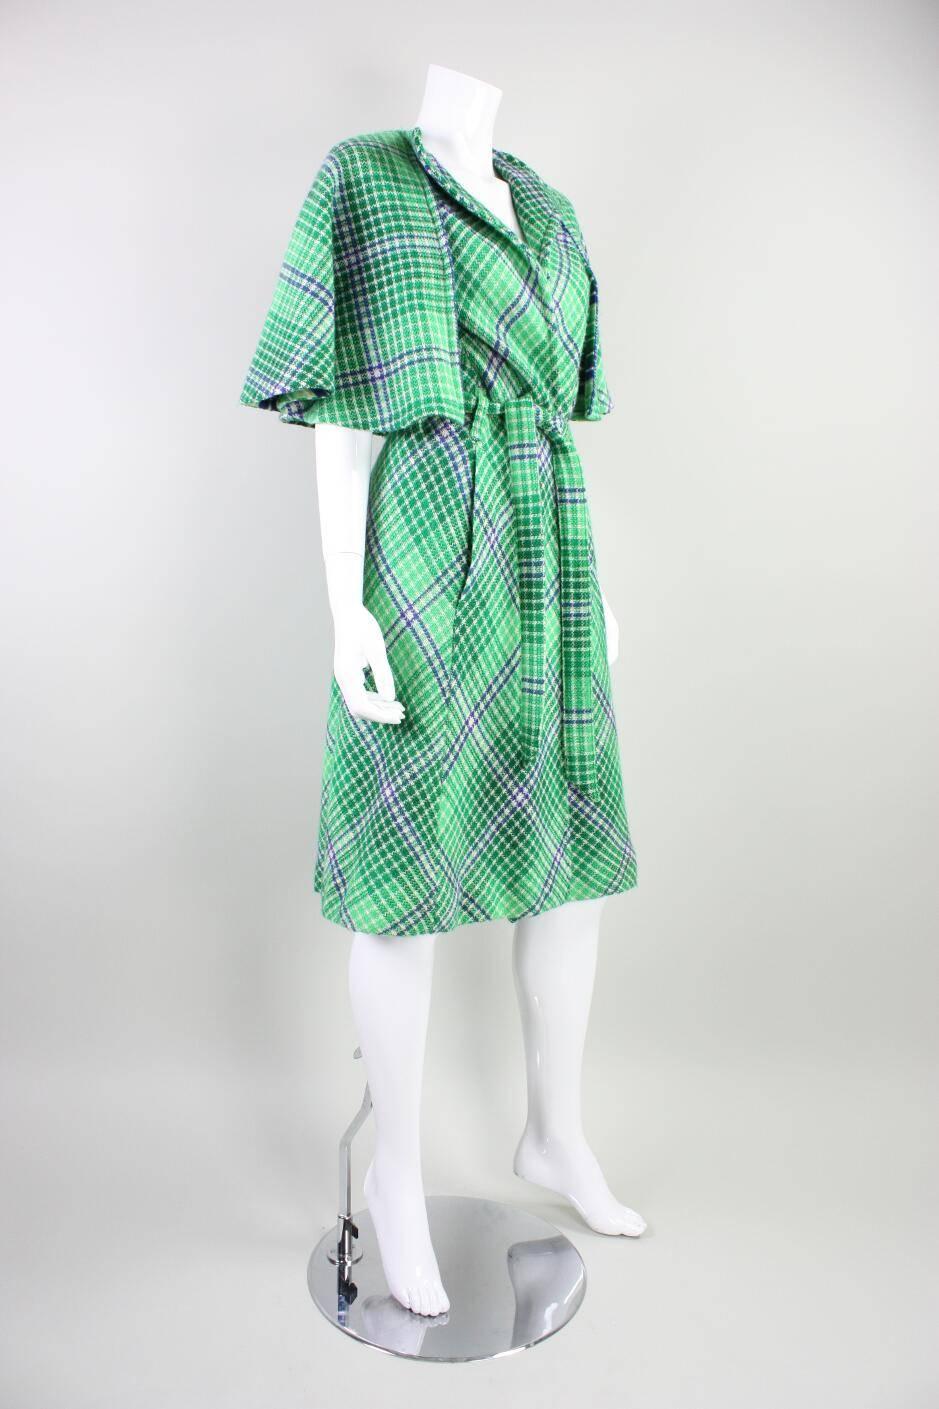 Vintage sleeveless coat from Missoni dates to the 1970's and is made of a green double-faced wool.  The exterior is a textured houndstooth pattern in green, white, and navy blue.  Lining has same color palette, but in a striped pattern instead. 